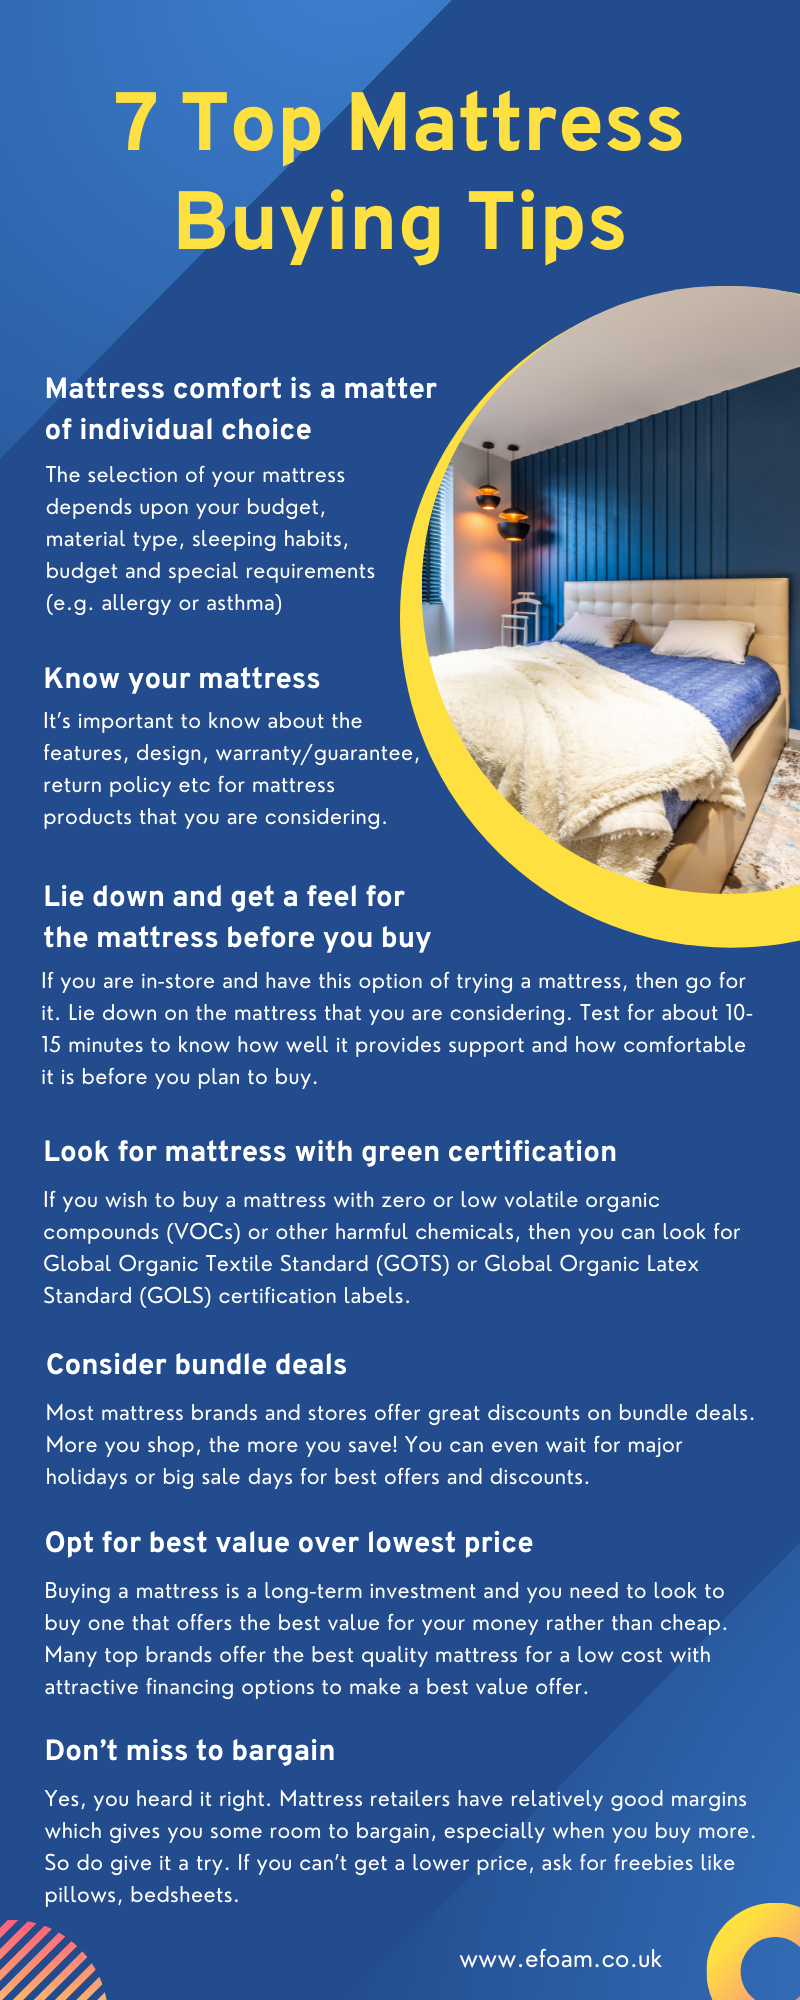 7 top mattress buying tips Infographic